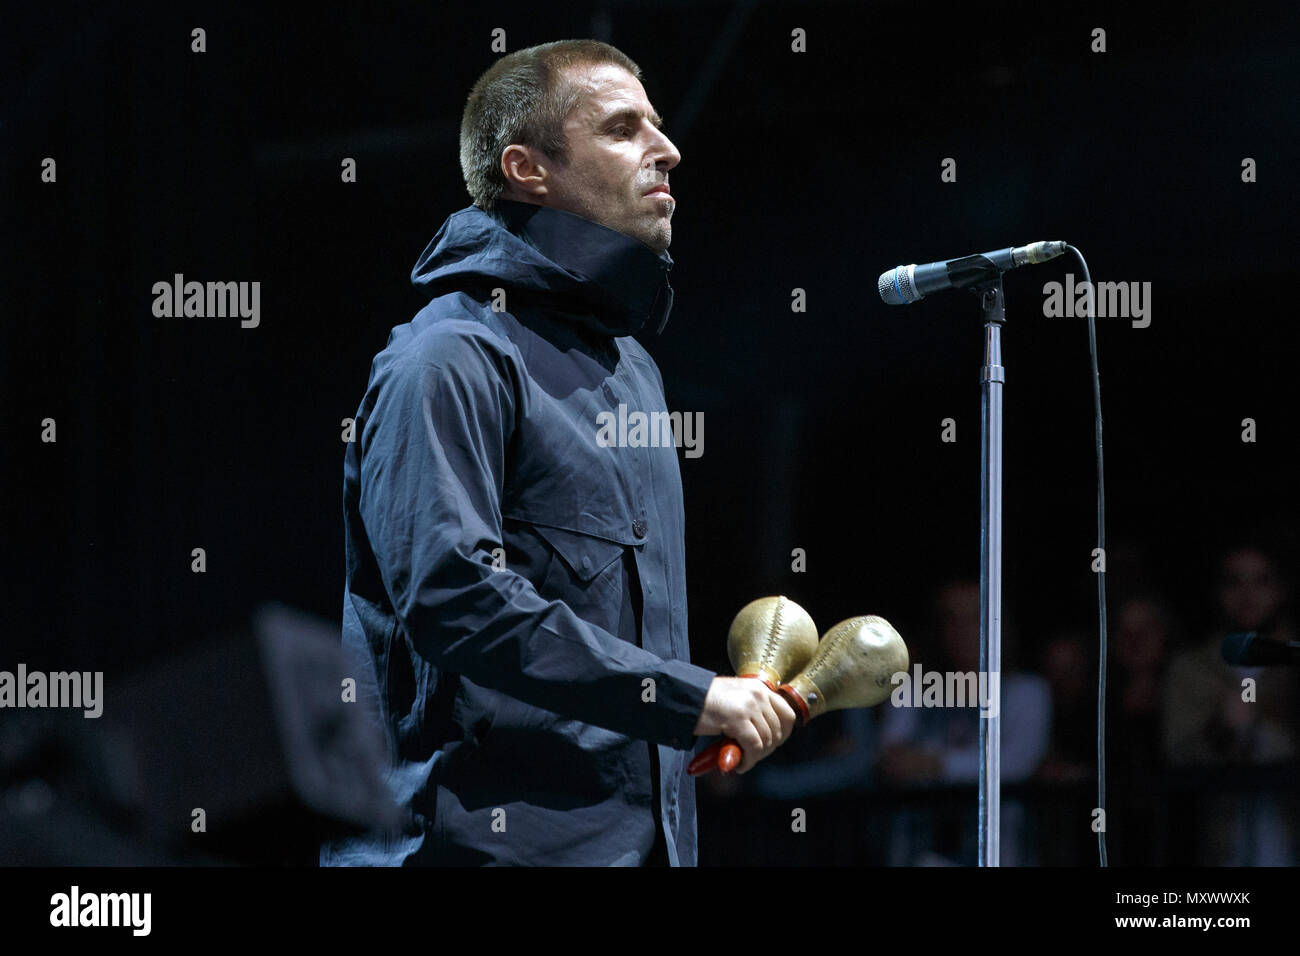 Liam Gallagher live onstage during a solo set. Liam Gallagher live, Liam Gallagher after Oasis, Liam Gallagher solo, Liam Gallagher singer. Stock Photo